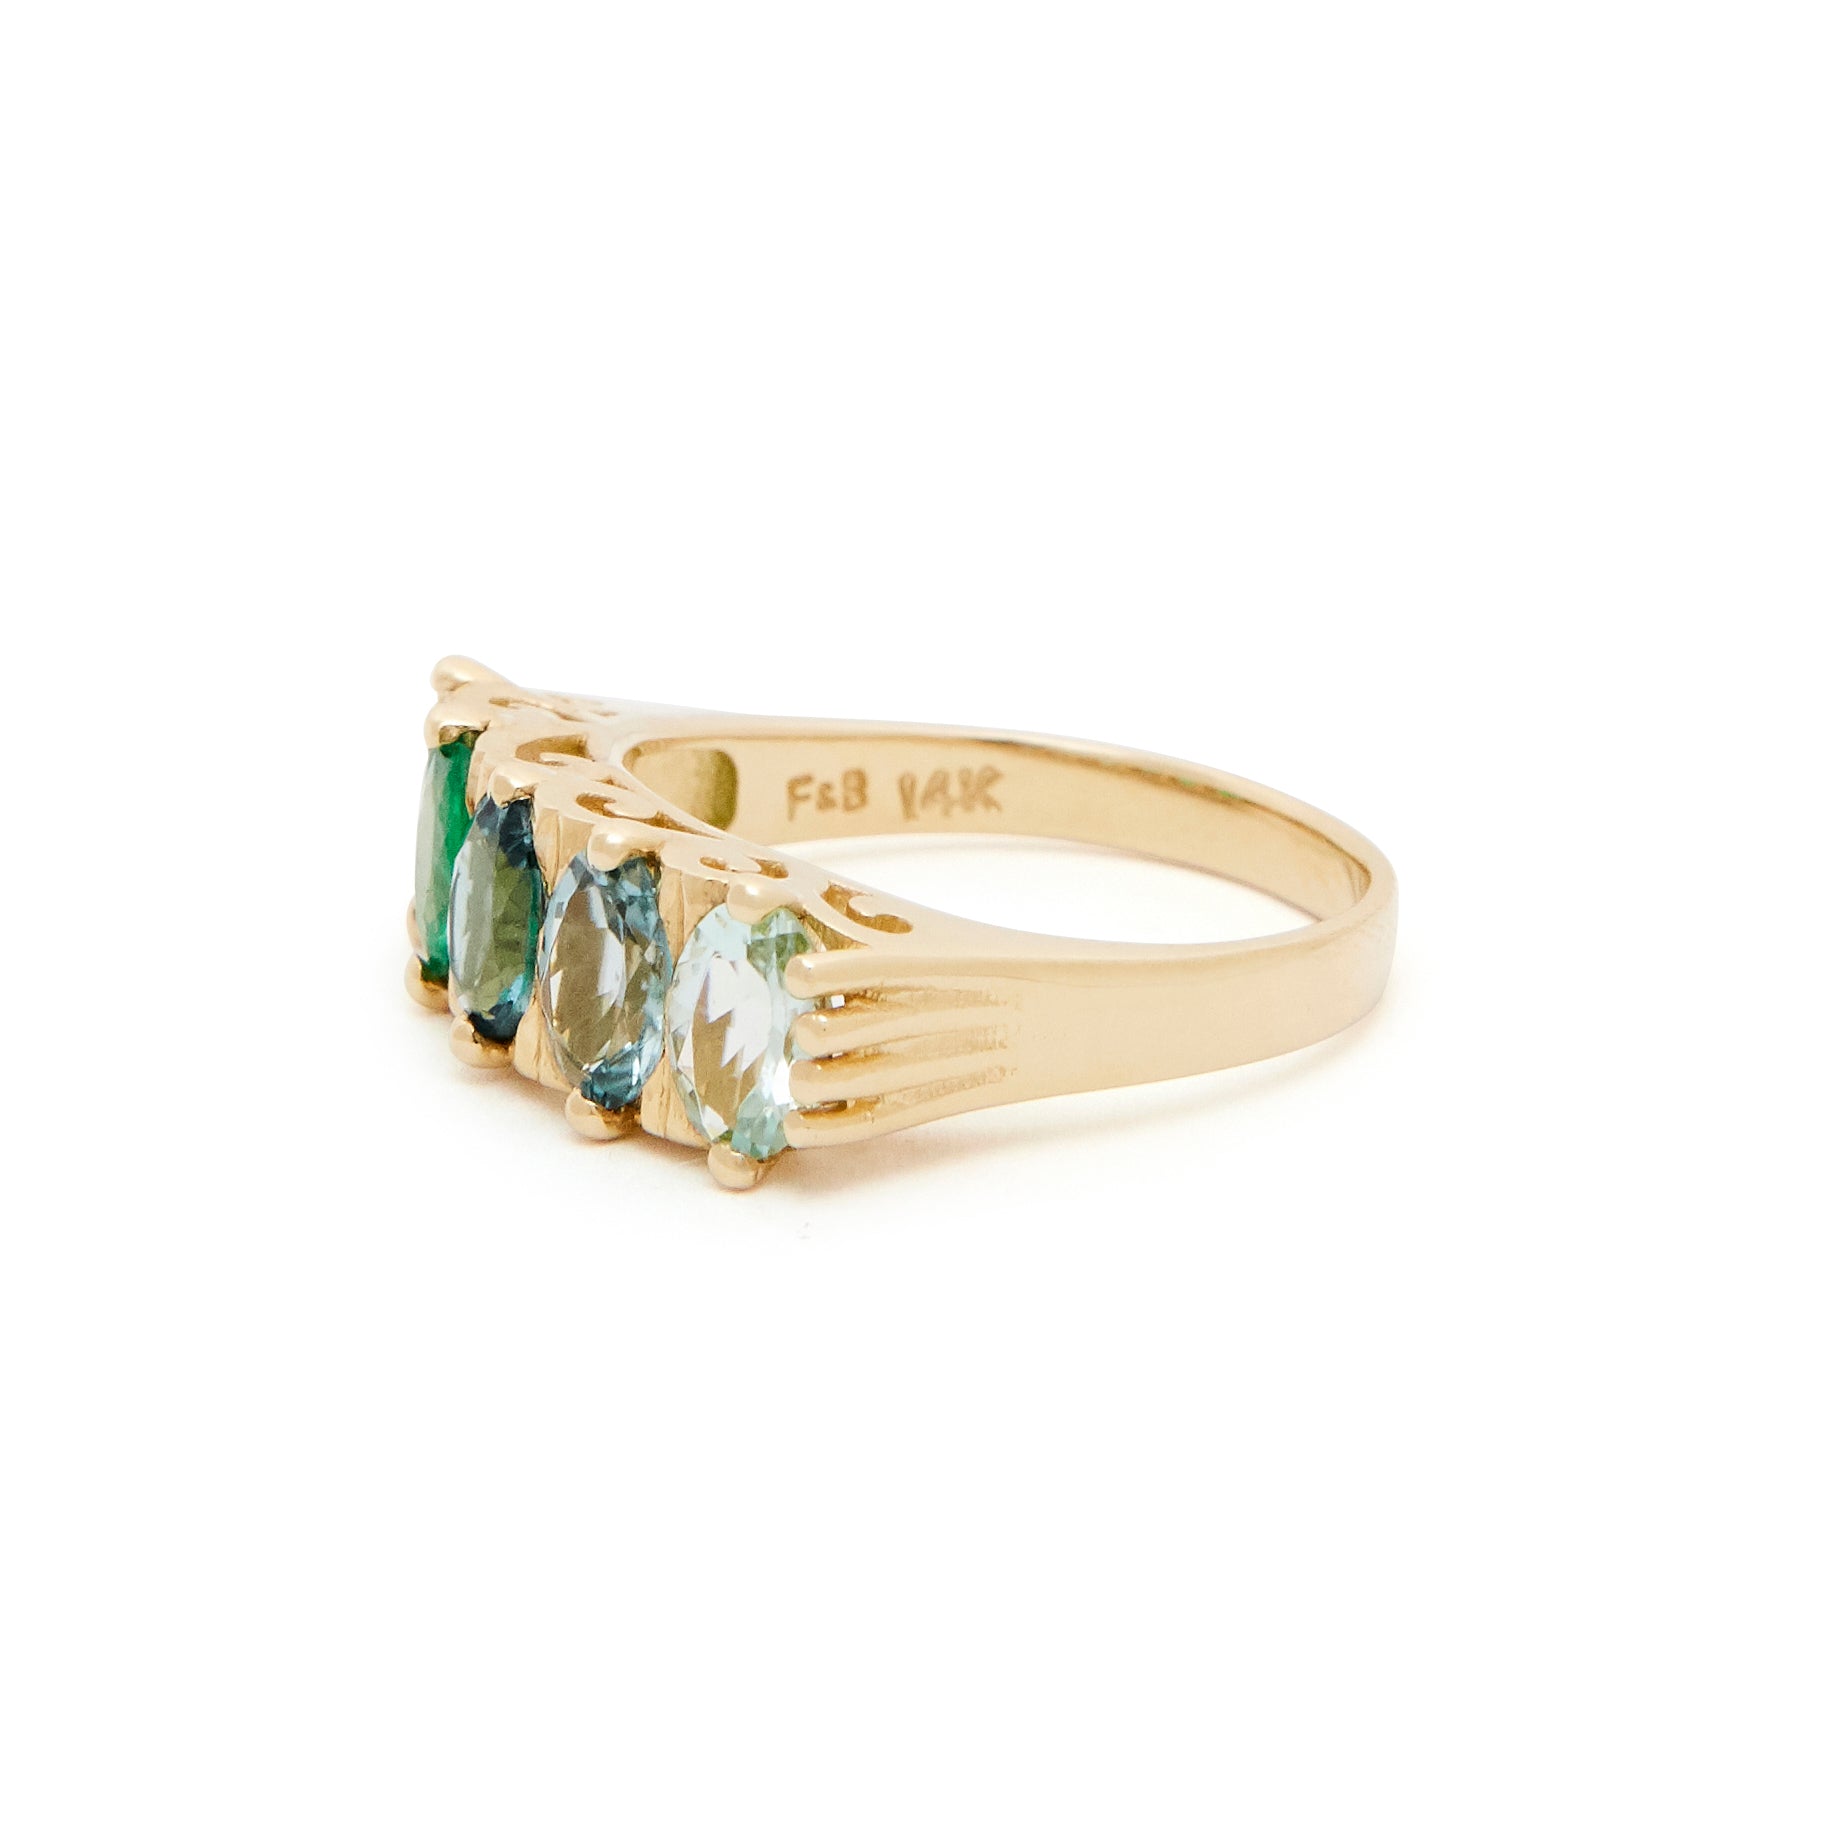 The F&B Island Ombre Ring